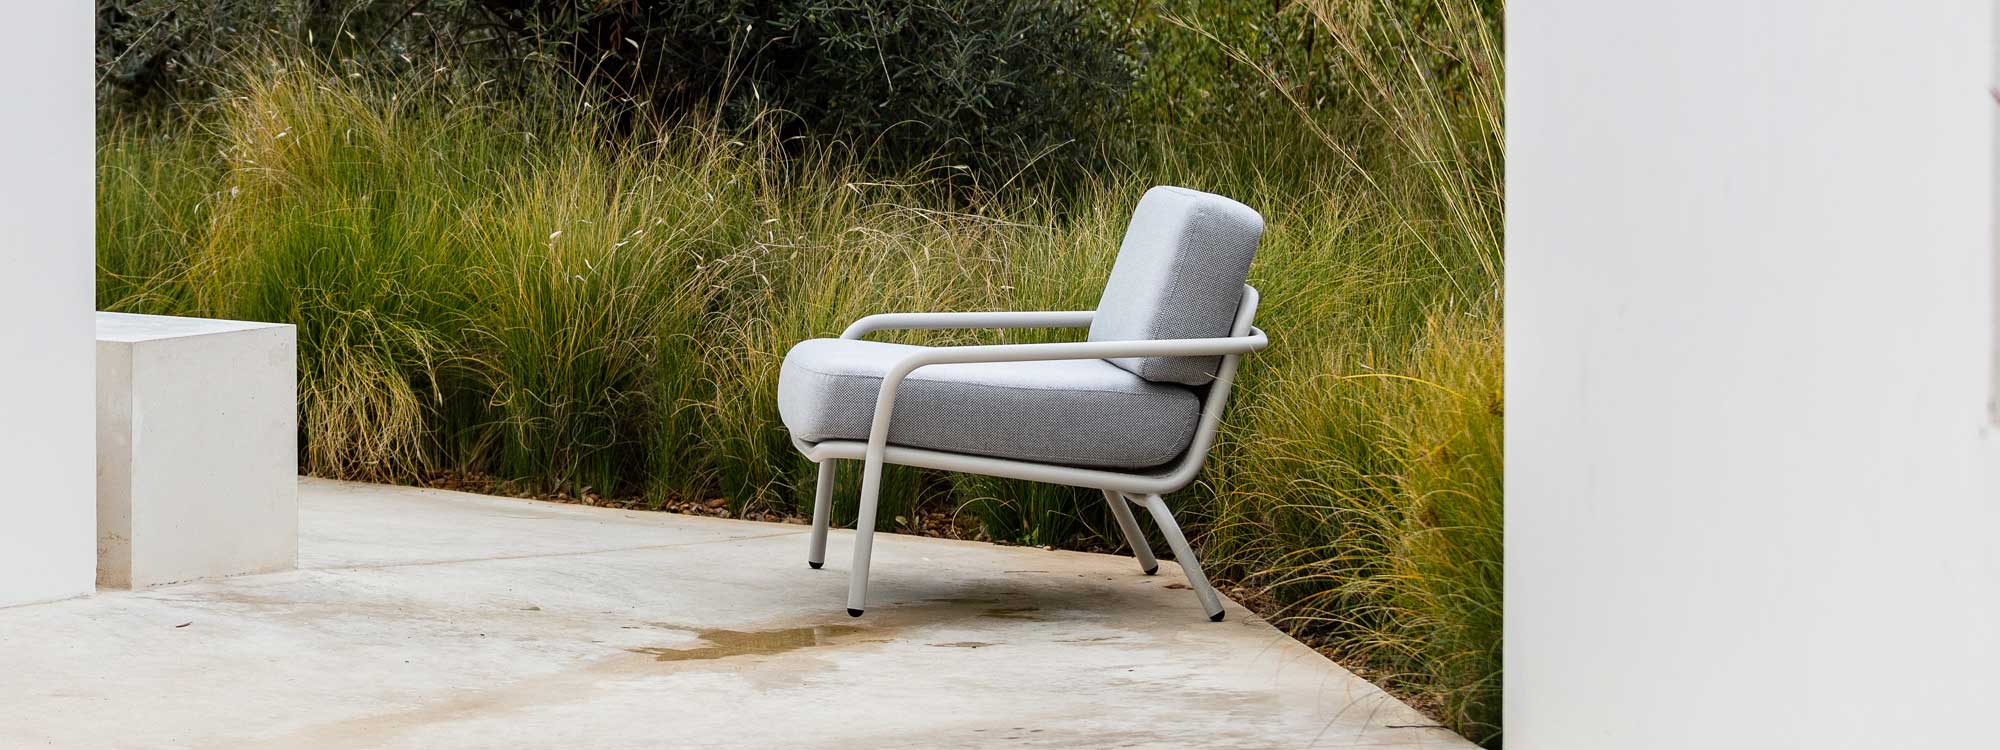 Image of white Starling modern outdoor relax chair with White frame and Grey cushions in front of ornamental grasses